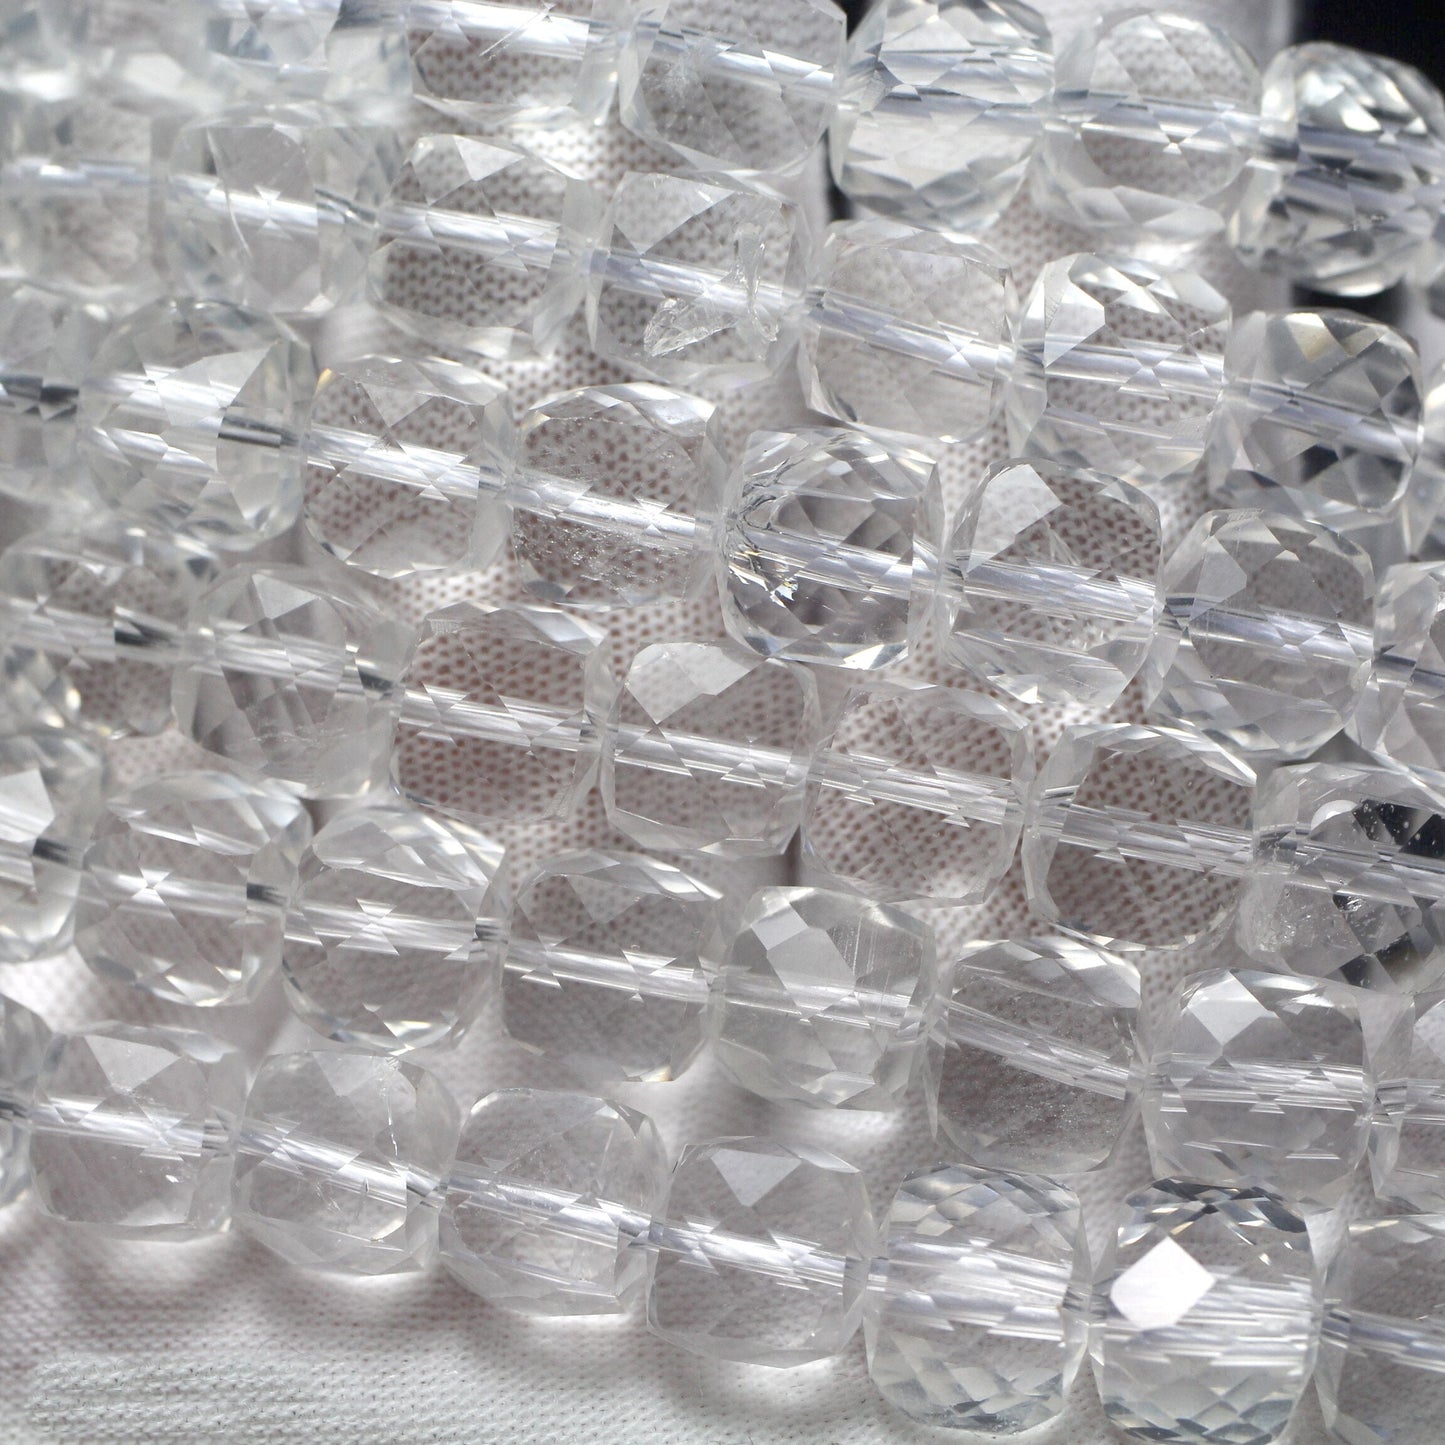 Rock Crystal Quartz Cube Faceted Beads 8mm 15''